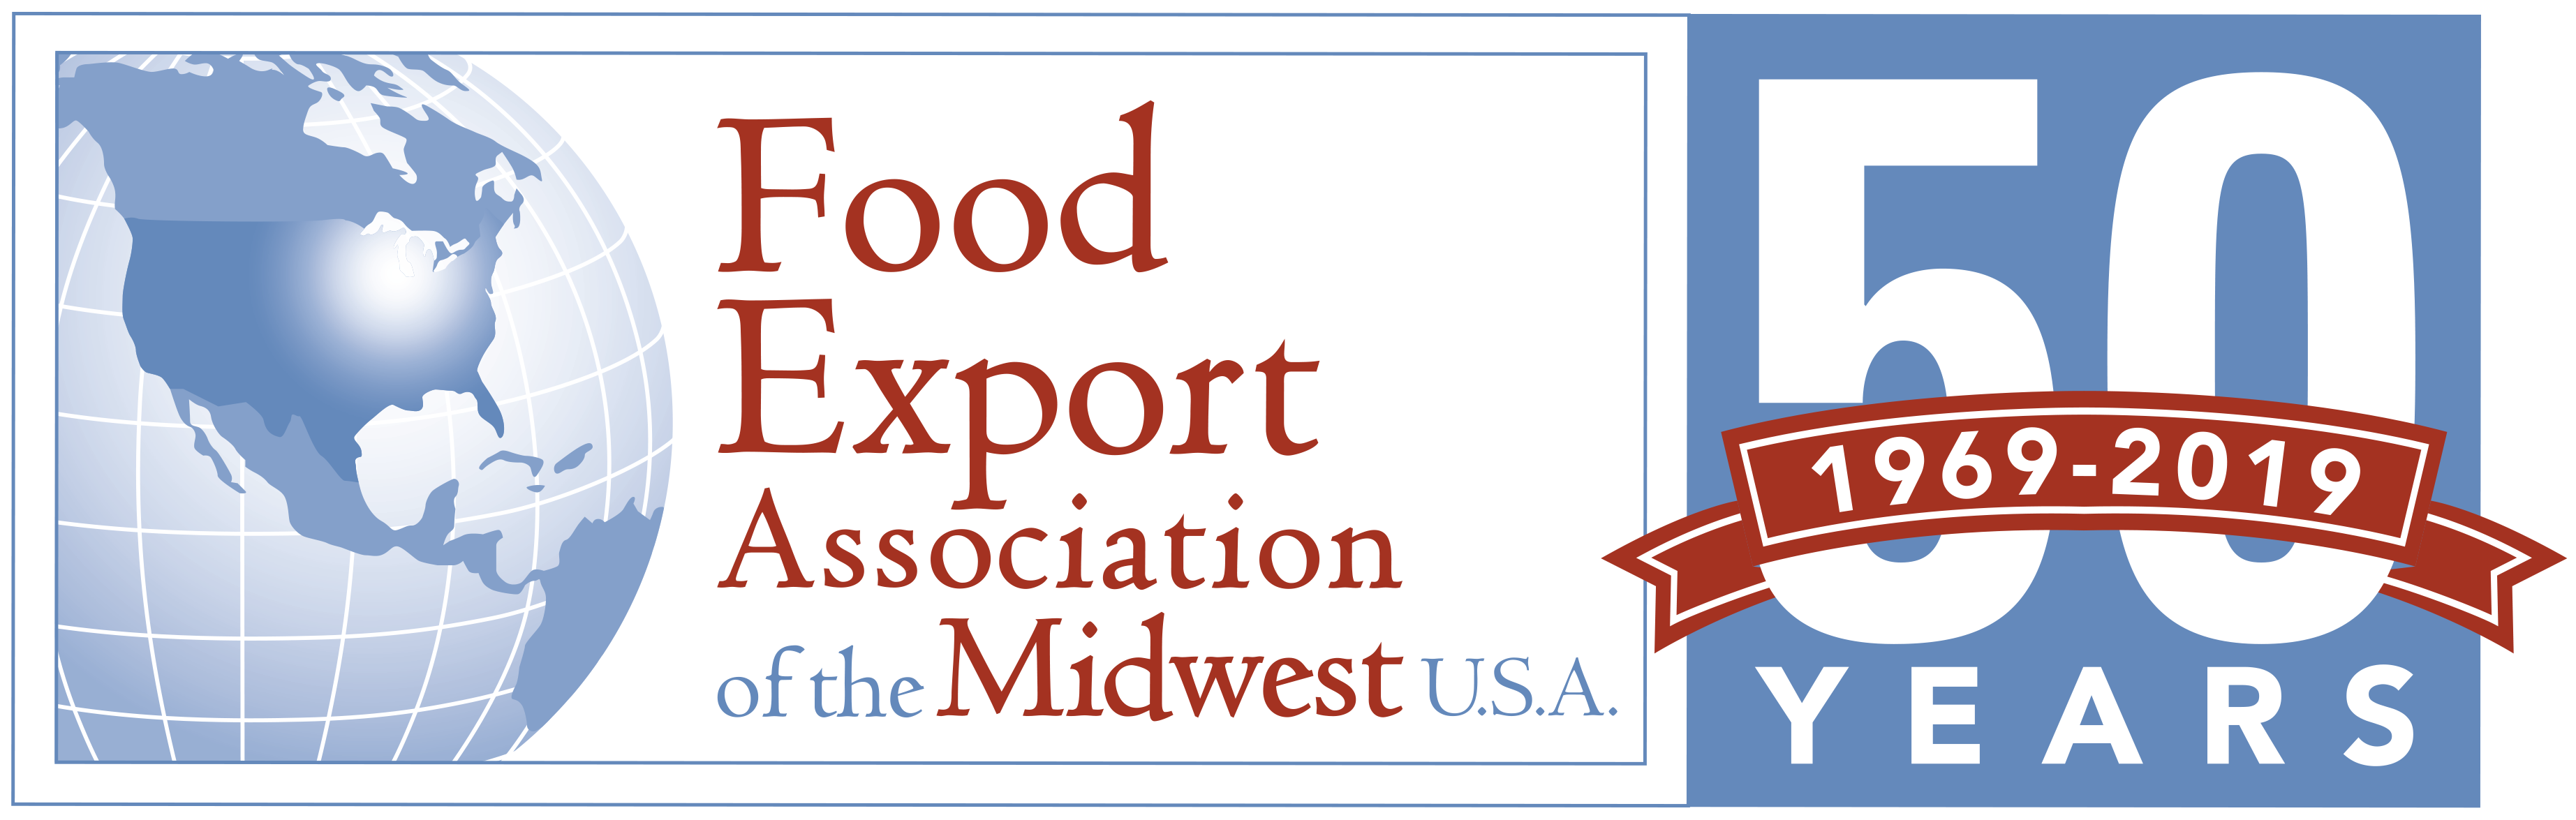 Food Export-Midwest 50th Anniversary logo